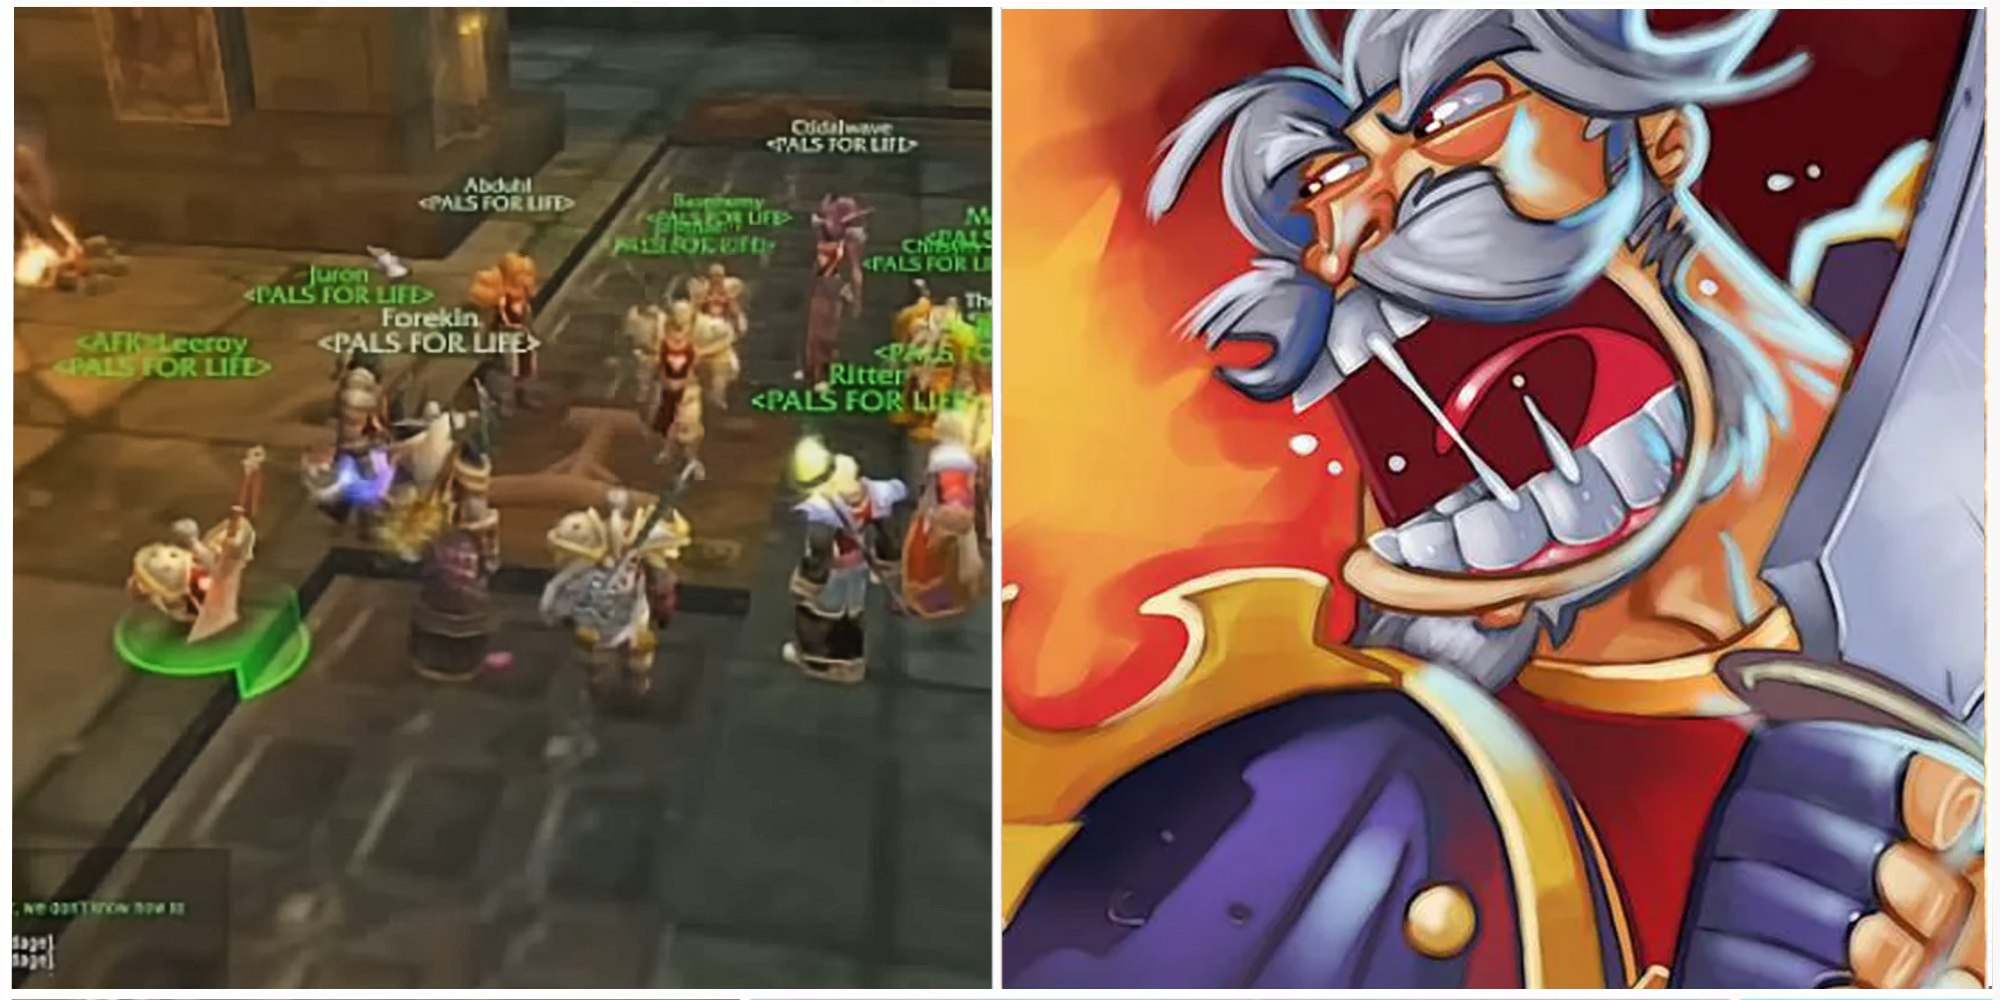 Leeroy Jenkins and the PALS FOR LIFE guild in the World of Warcraft video